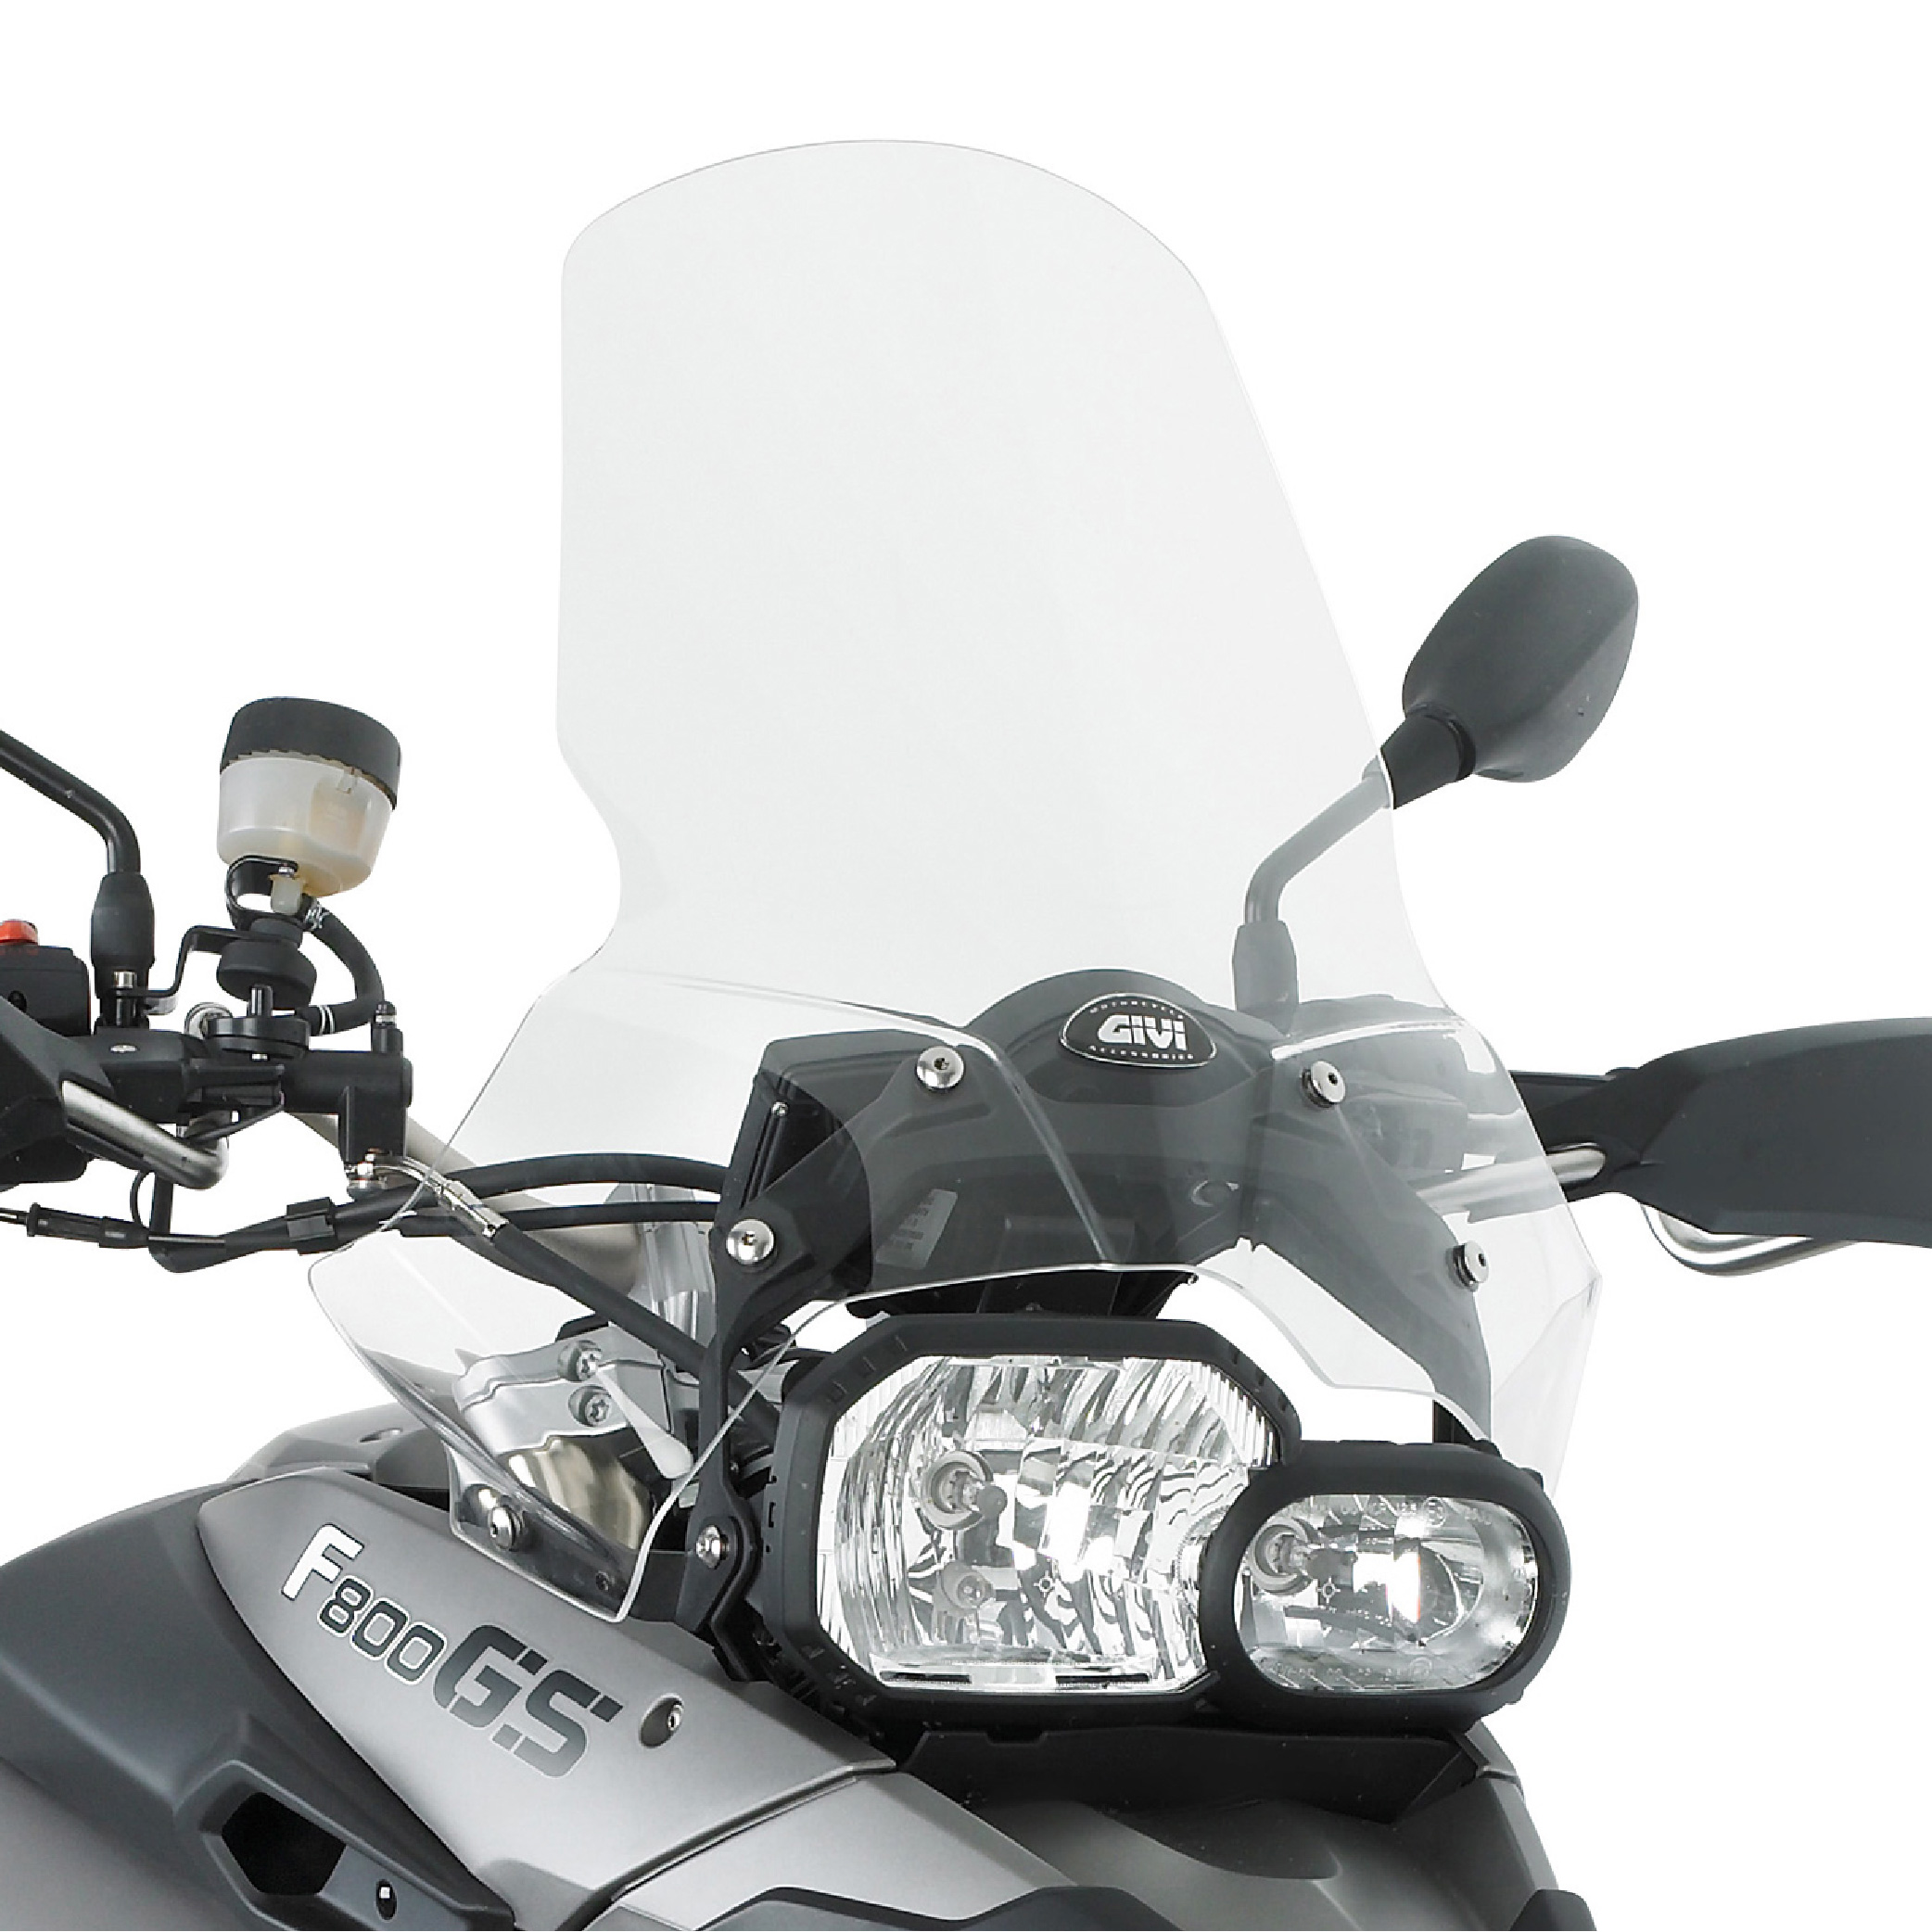 GIVI 333DT Specific Screen for BMW F 650 GS/ F 800 GS (2008 – 2017) – อุปกรณ์กันลม